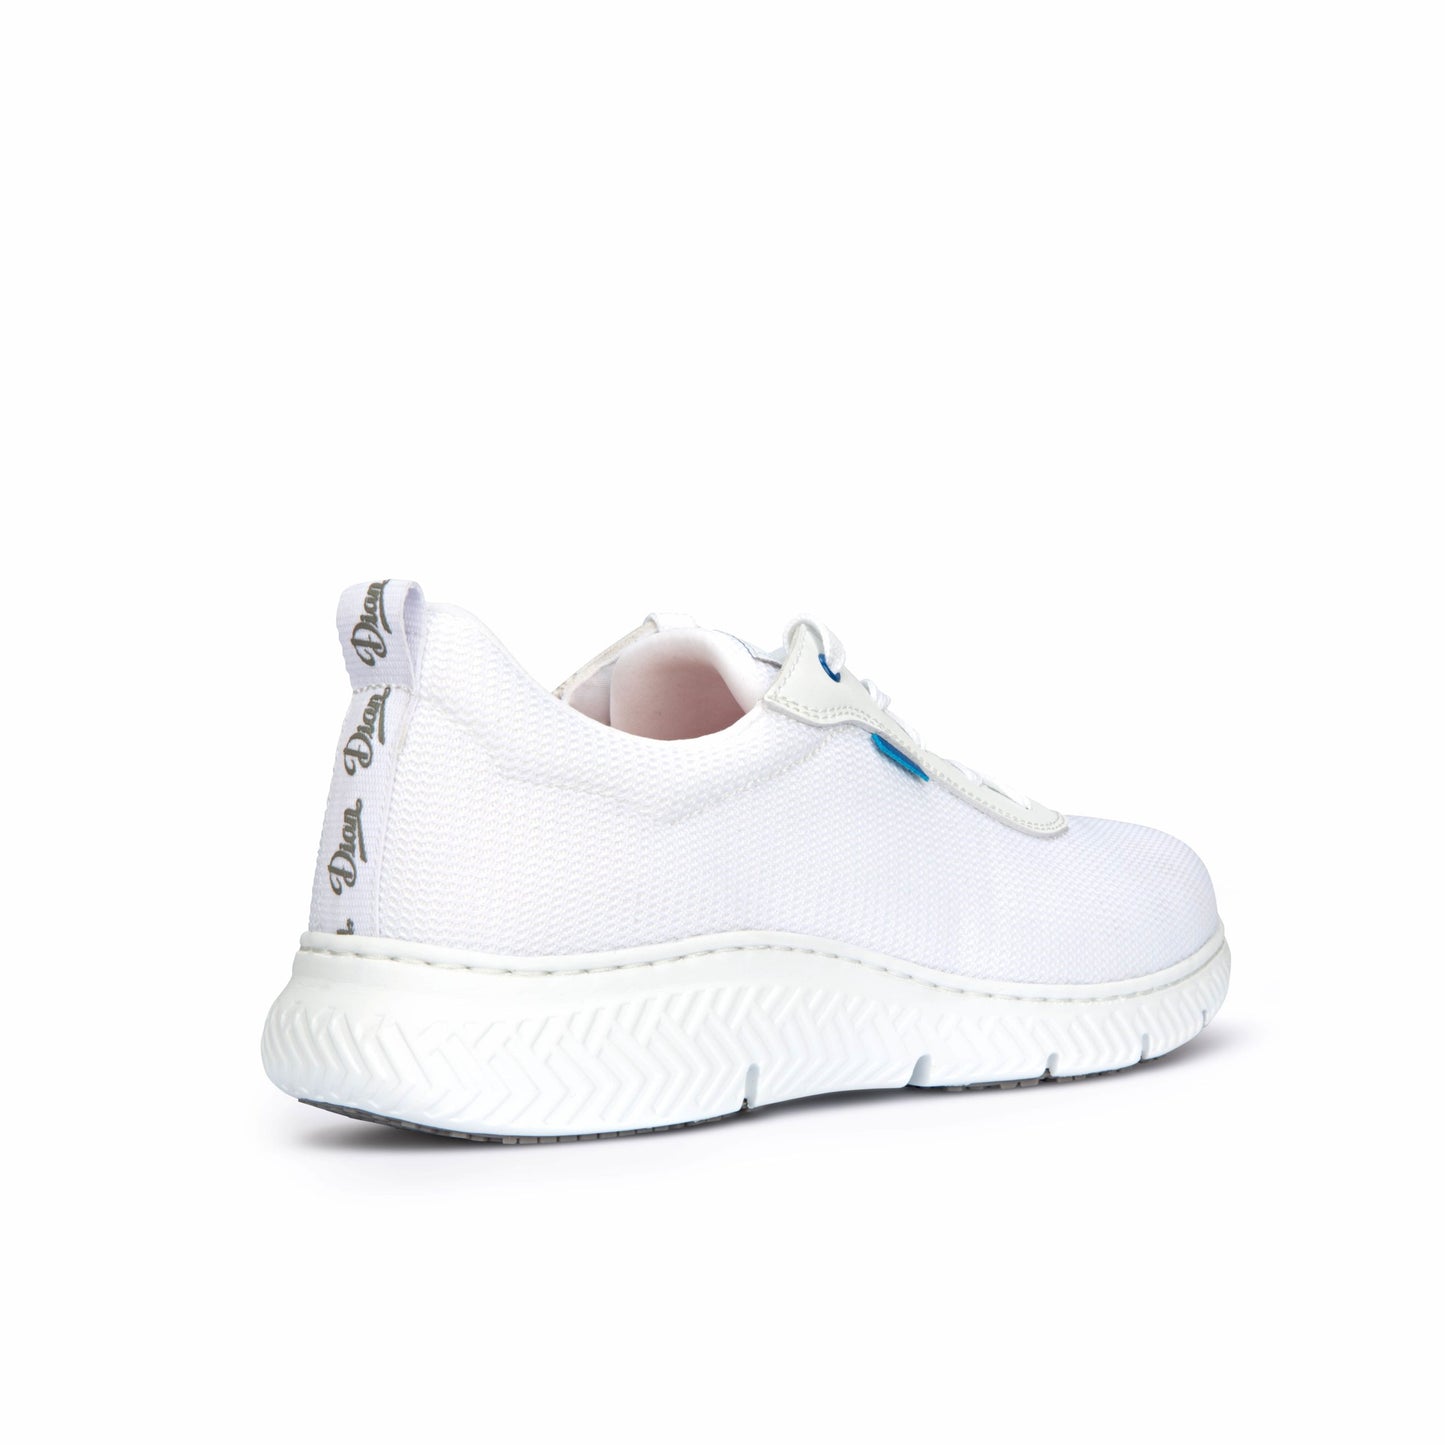 Dian SEUL. Sneaker with laces